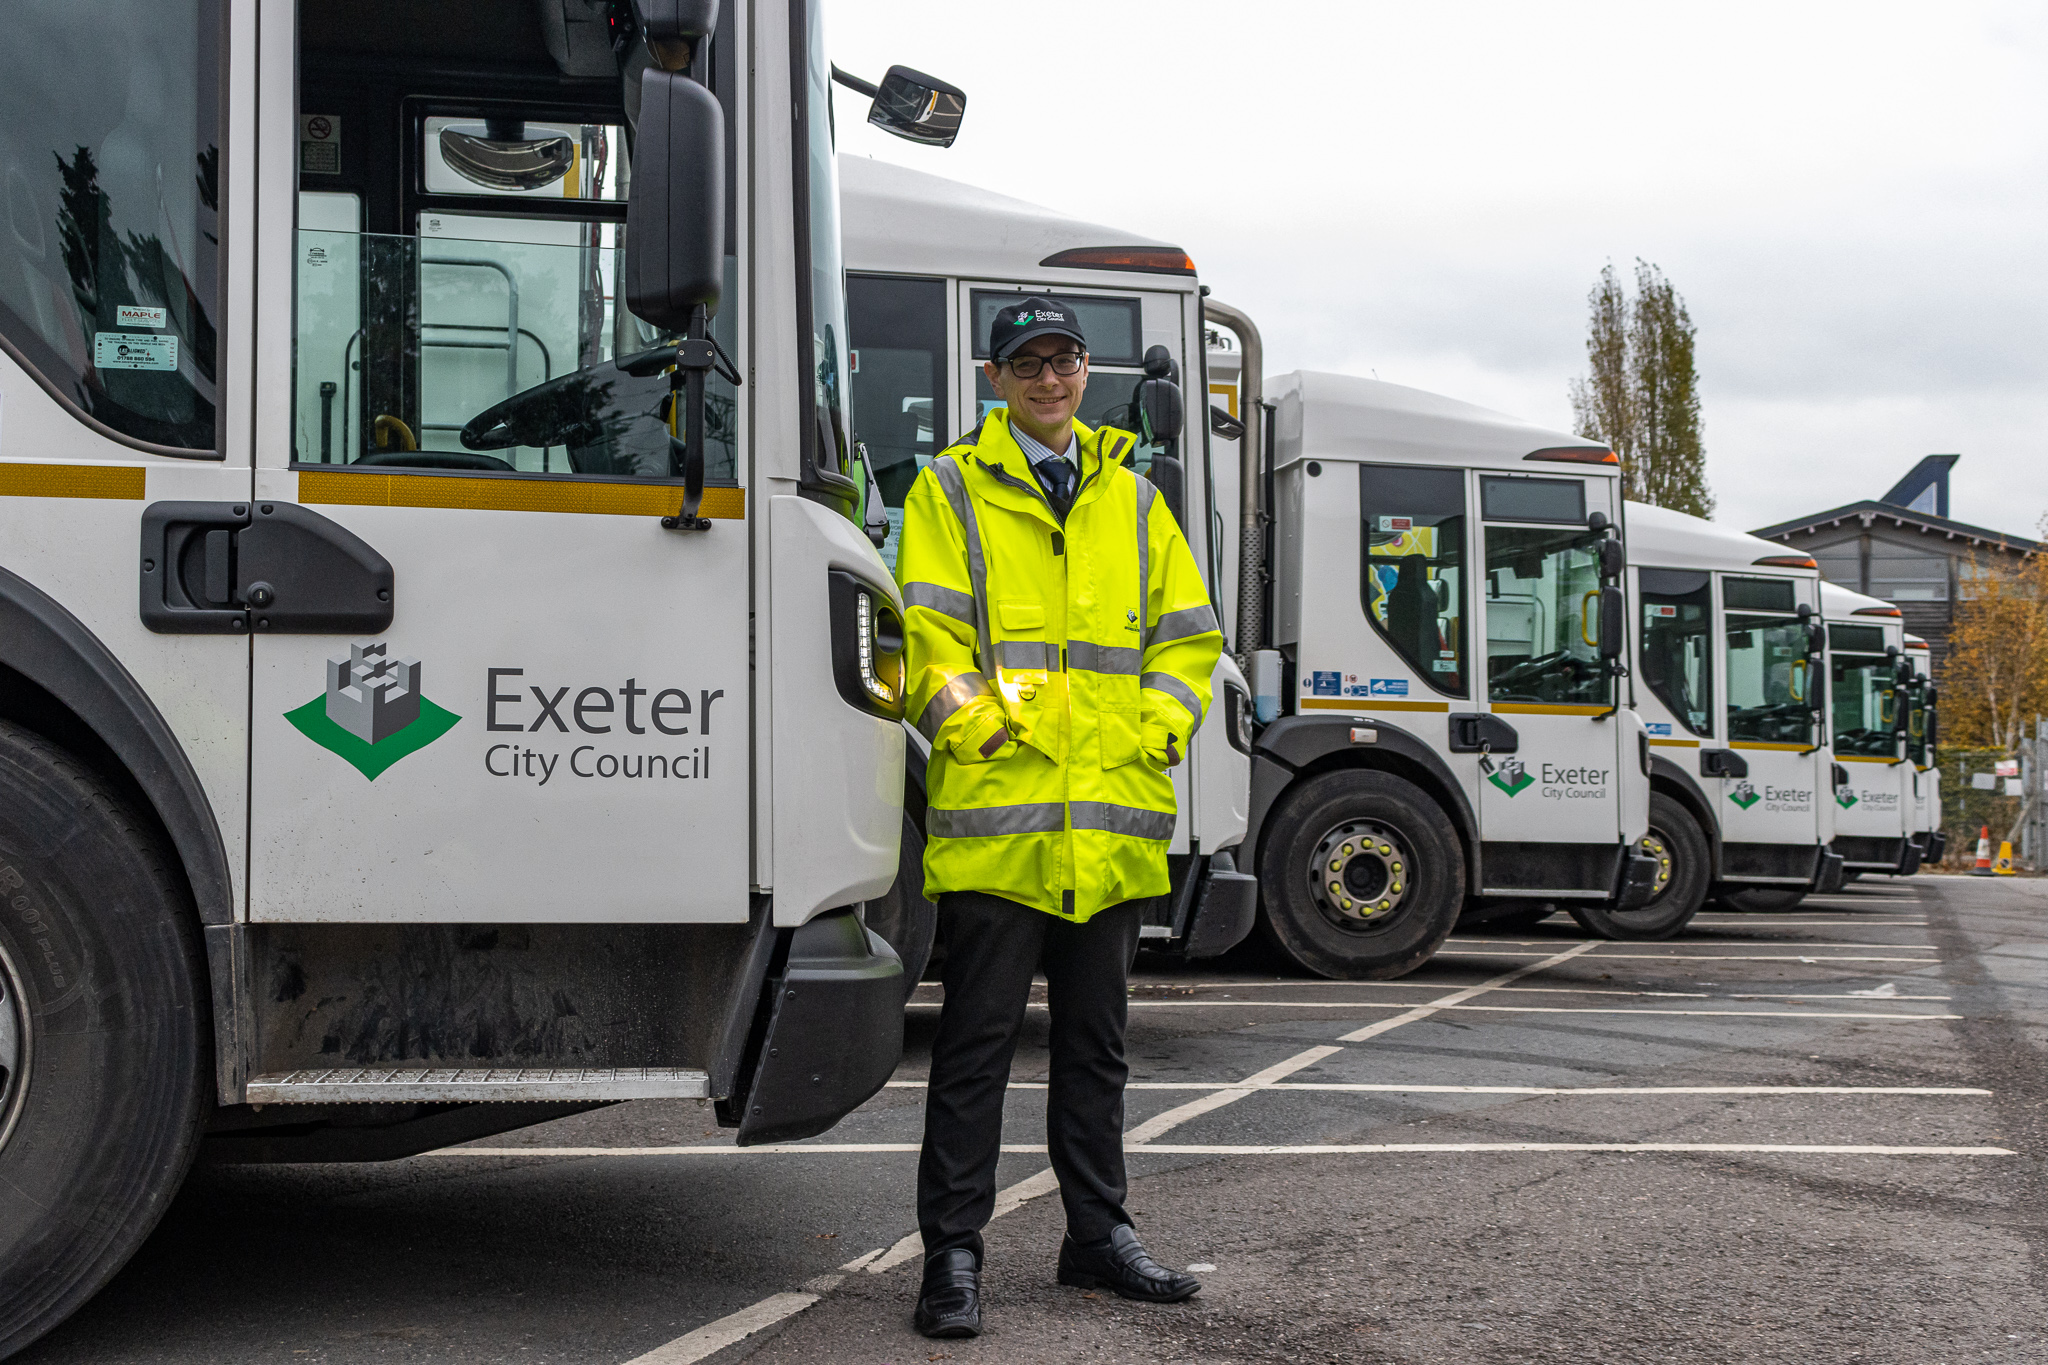 Exeter City Council Upgrades Fleet With Latest Vehicles And Technology